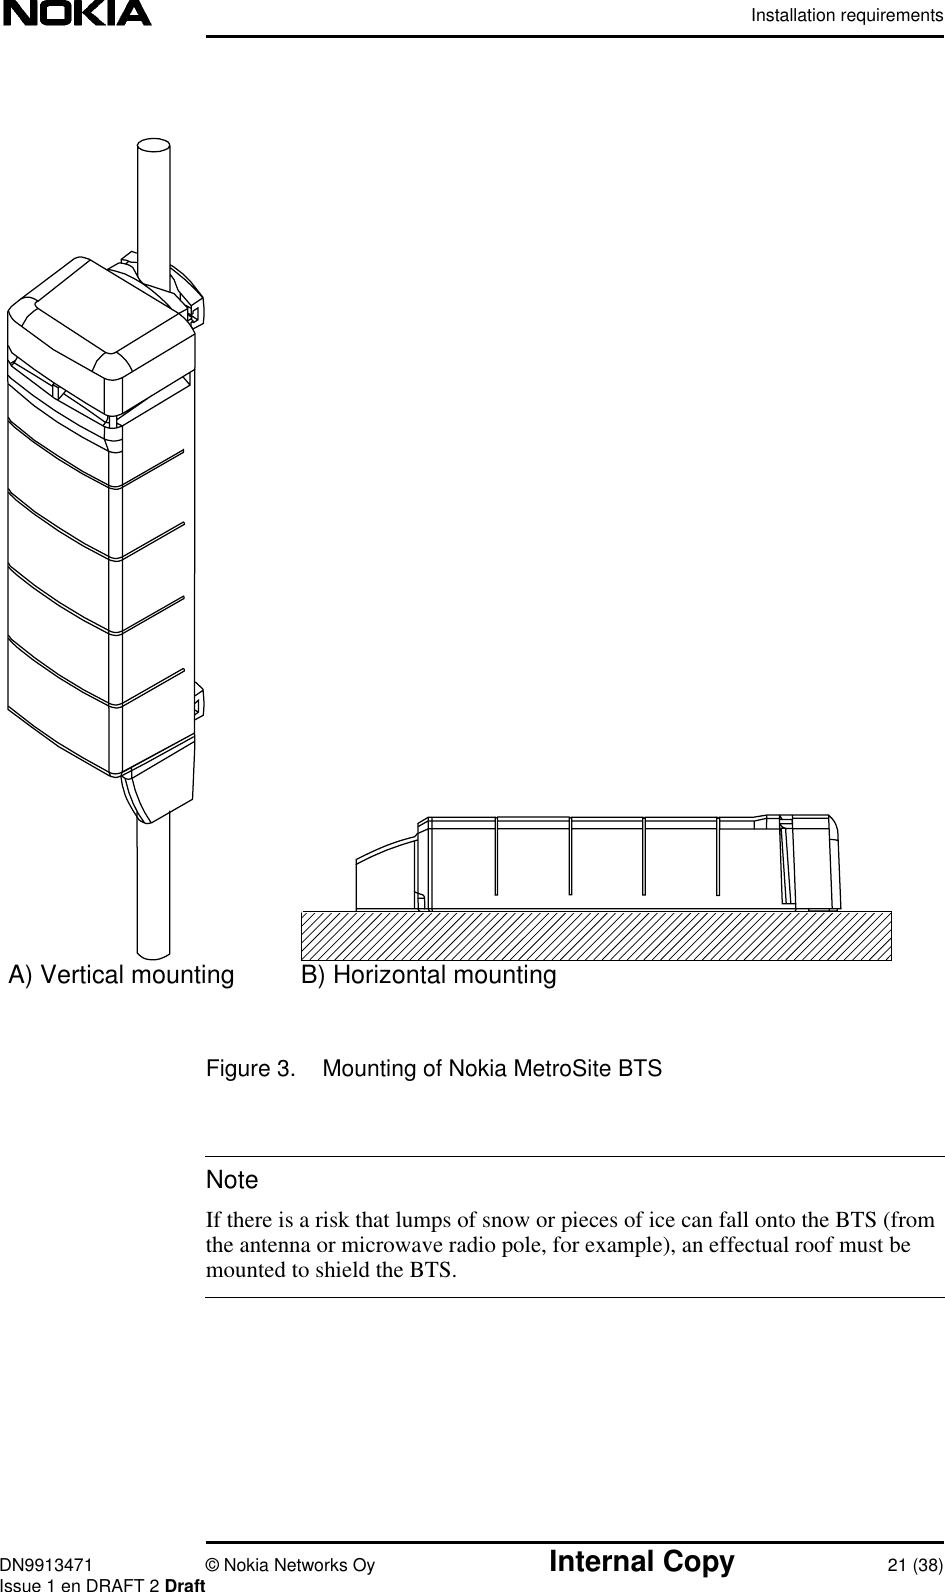 Installation requirementsDN9913471 © Nokia Networks Oy Internal Copy 21 (38)Issue 1 en DRAFT 2 DraftNoteFigure 3. Mounting of Nokia MetroSite BTSIf there is a risk that lumps of snow or pieces of ice can fall onto the BTS (fromthe antenna or microwave radio pole, for example), an effectual roof must bemounted to shield the BTS.B) Horizontal mountingA) Vertical mounting